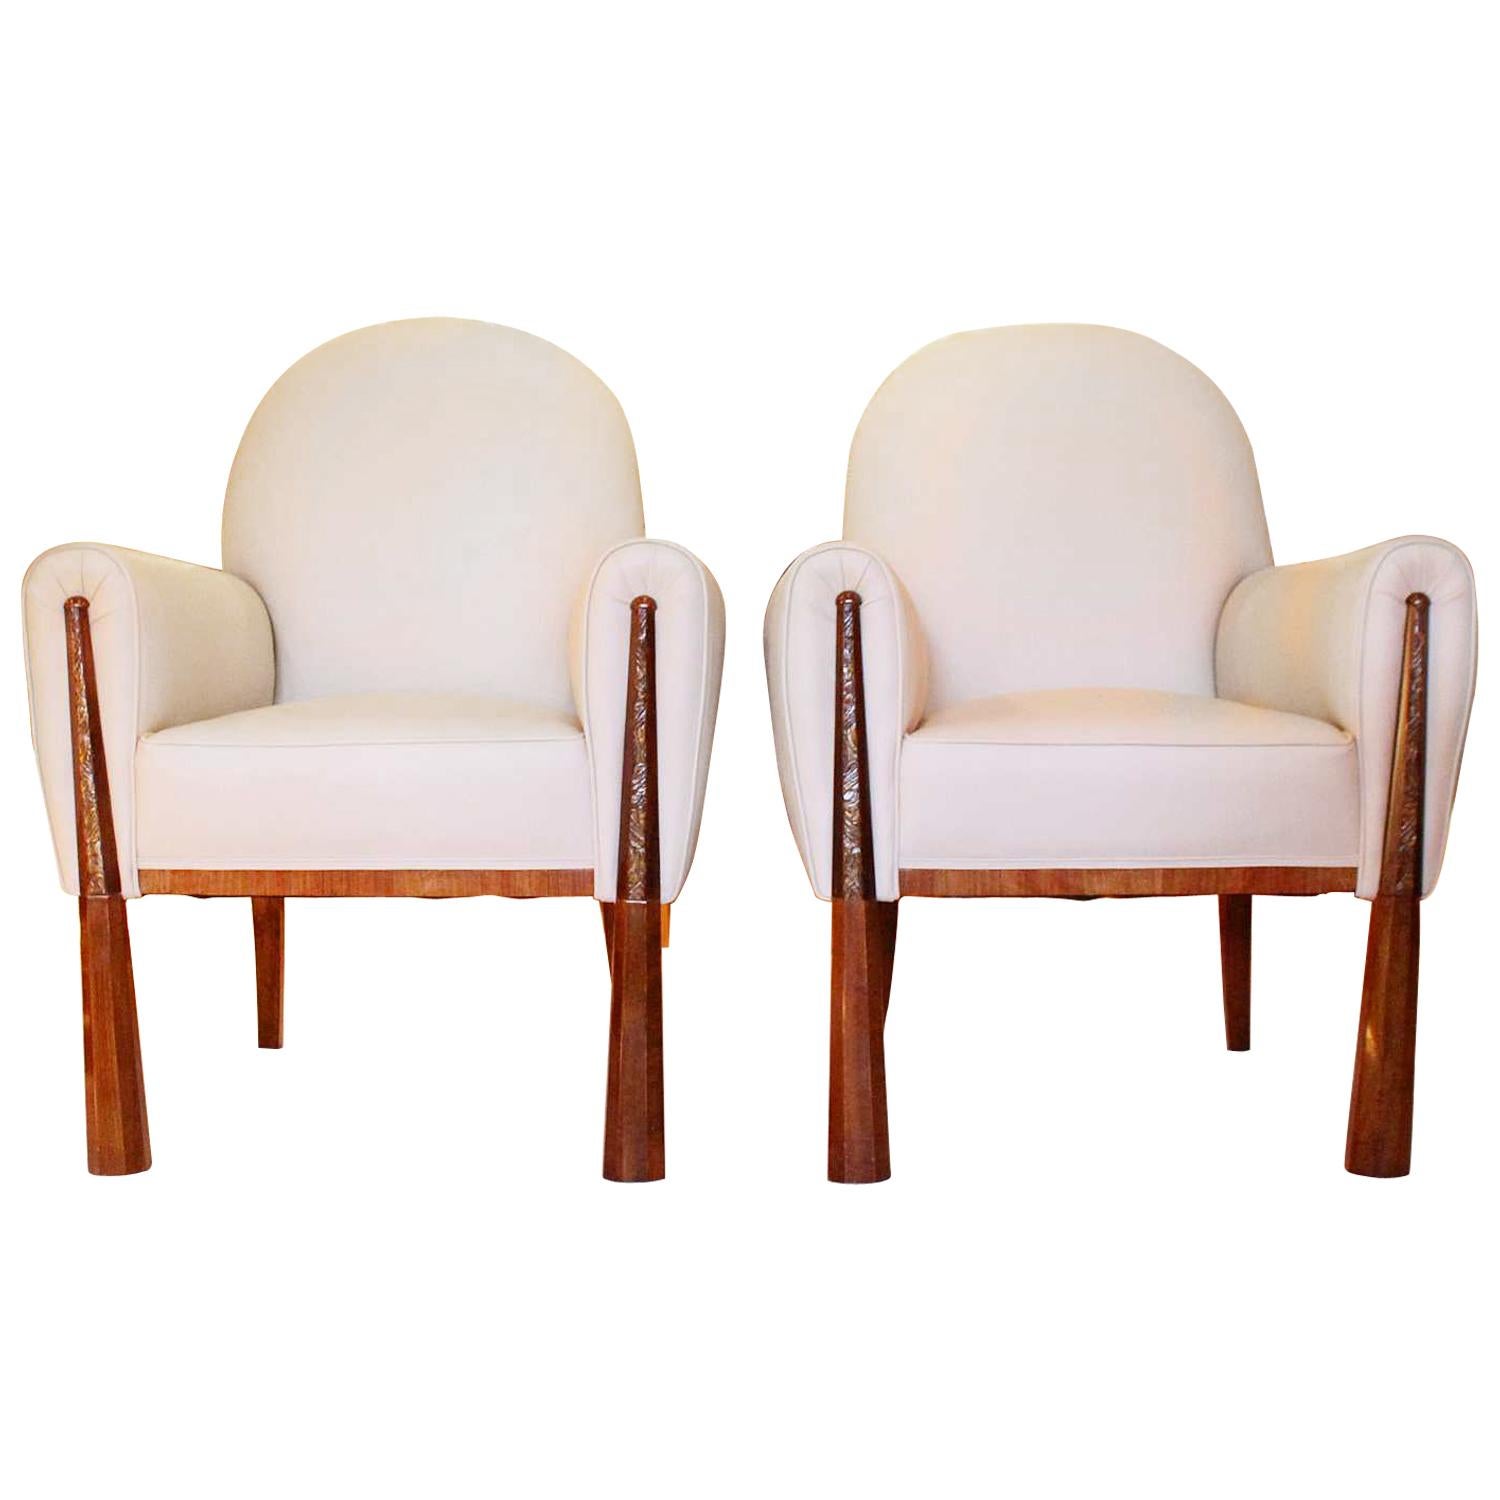 Pair of French Art Deco Chairs